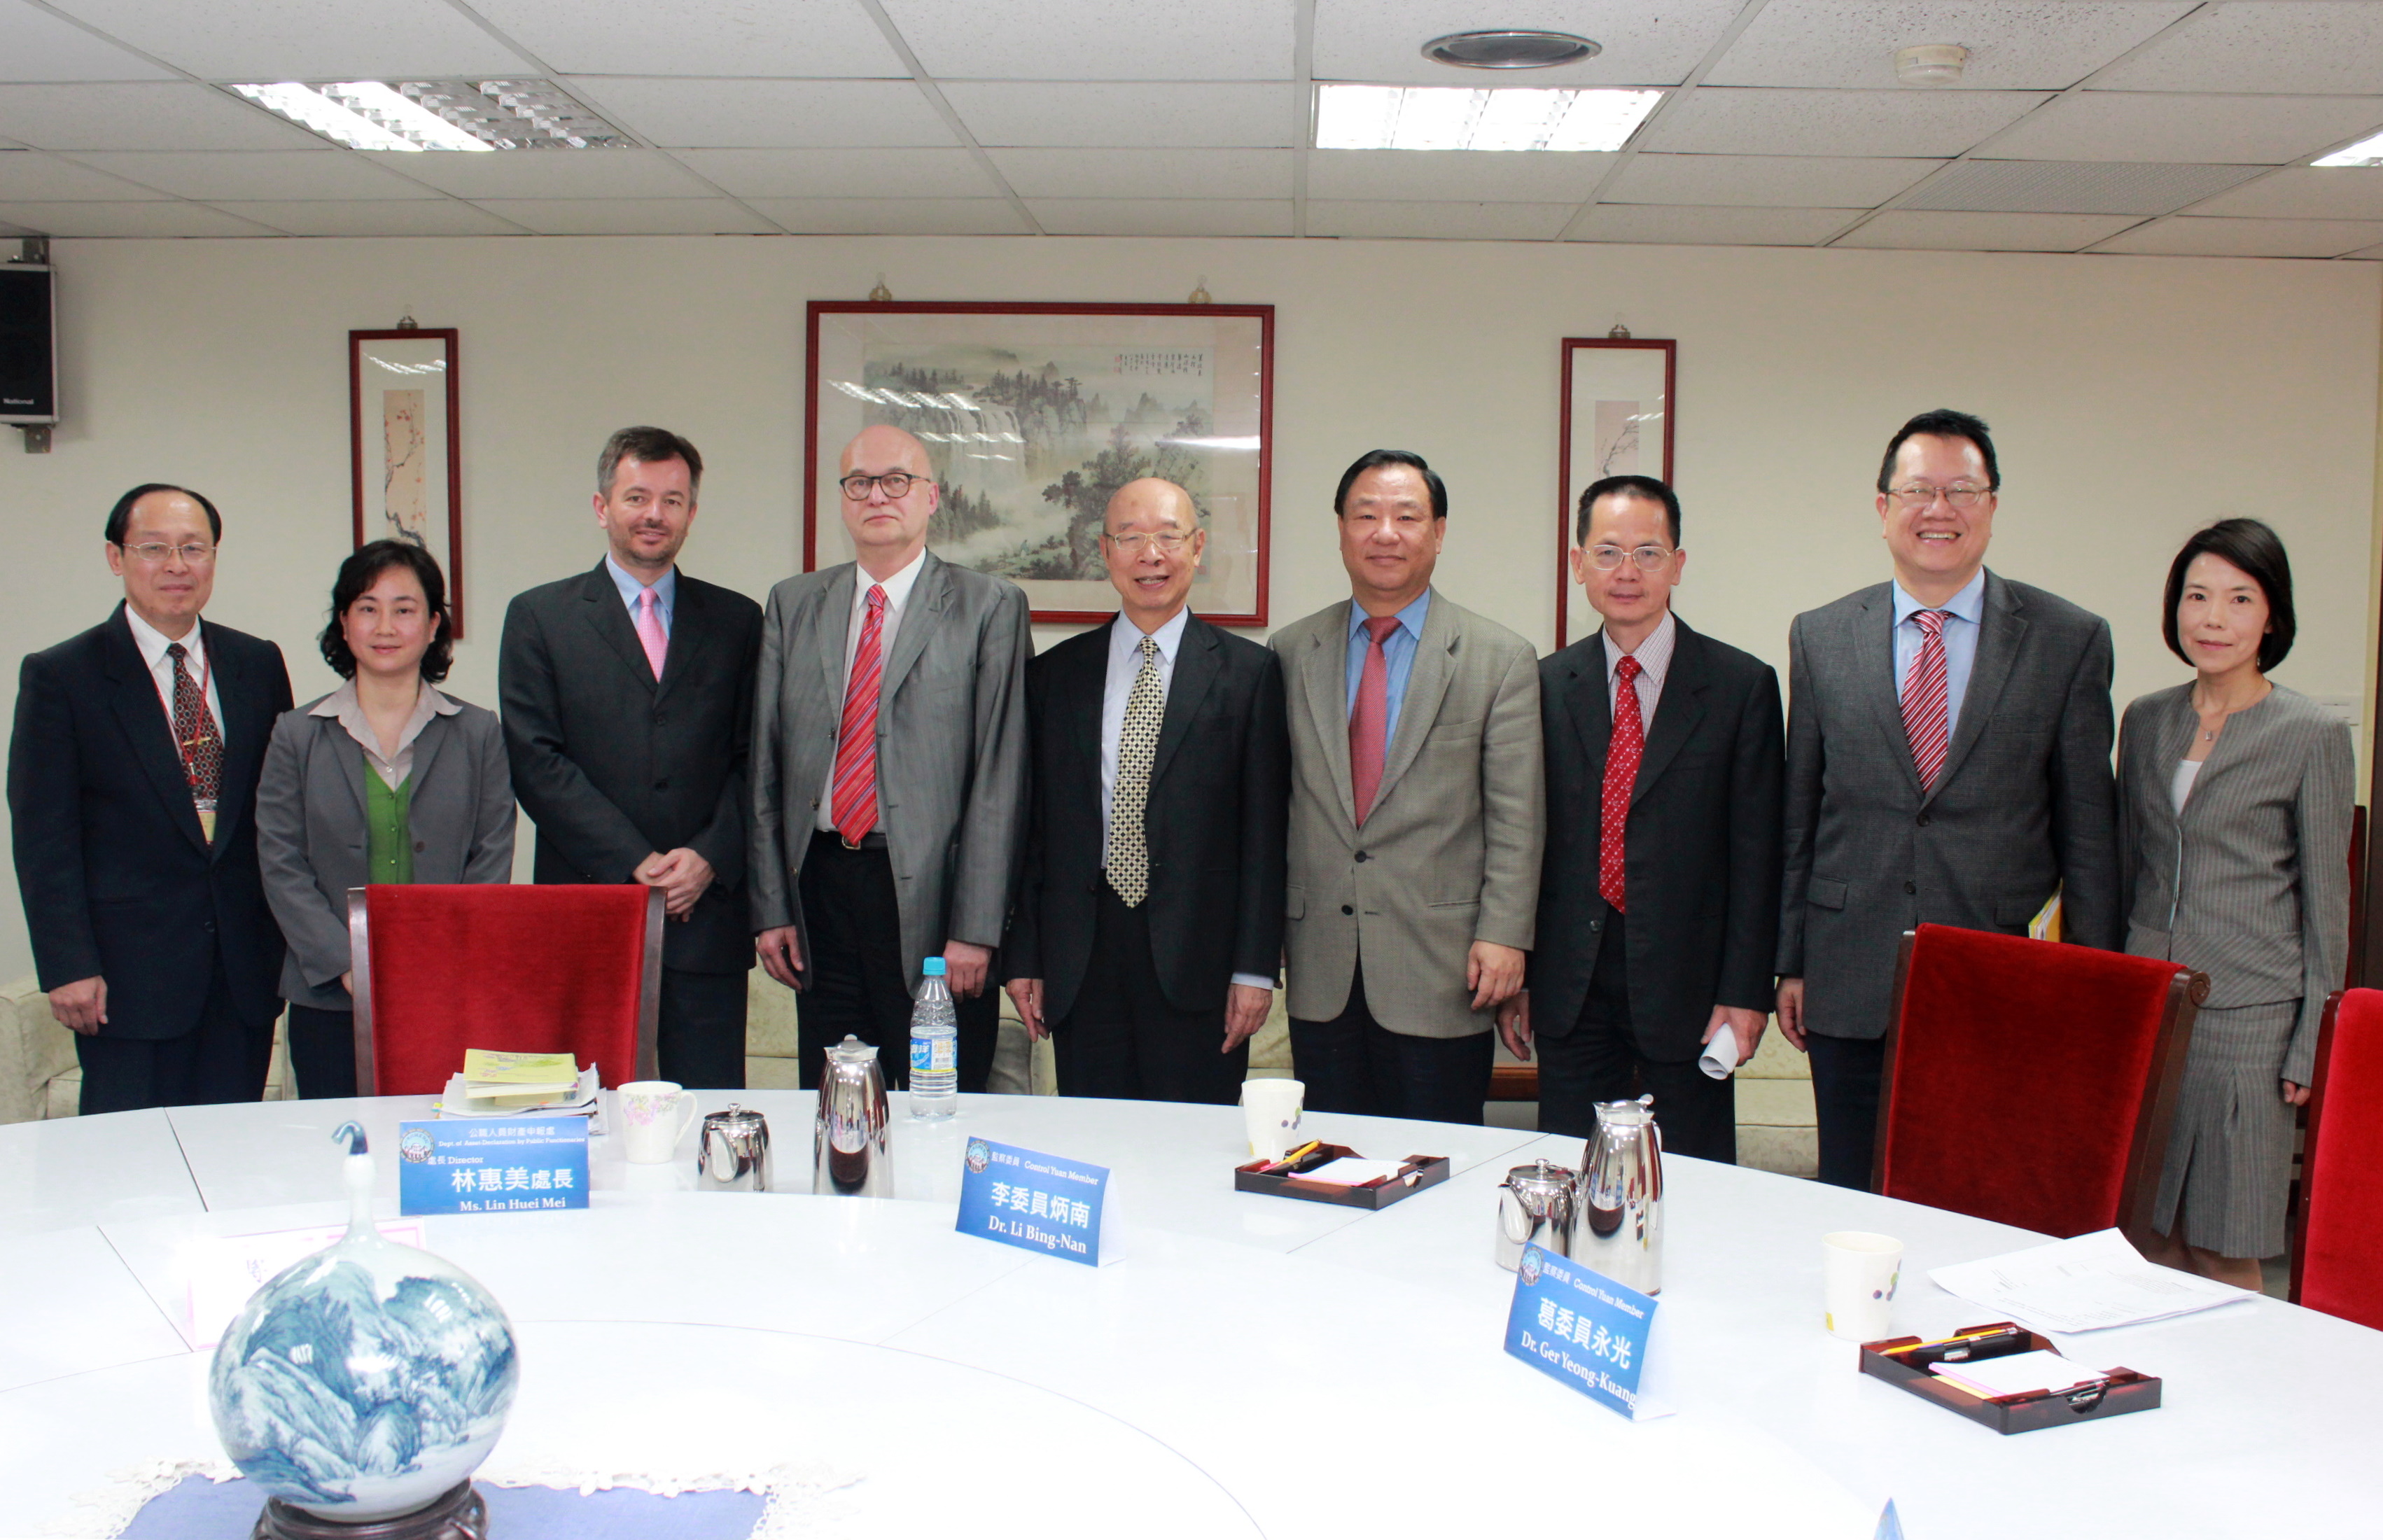 Discussion with the Control Yuan members and staff